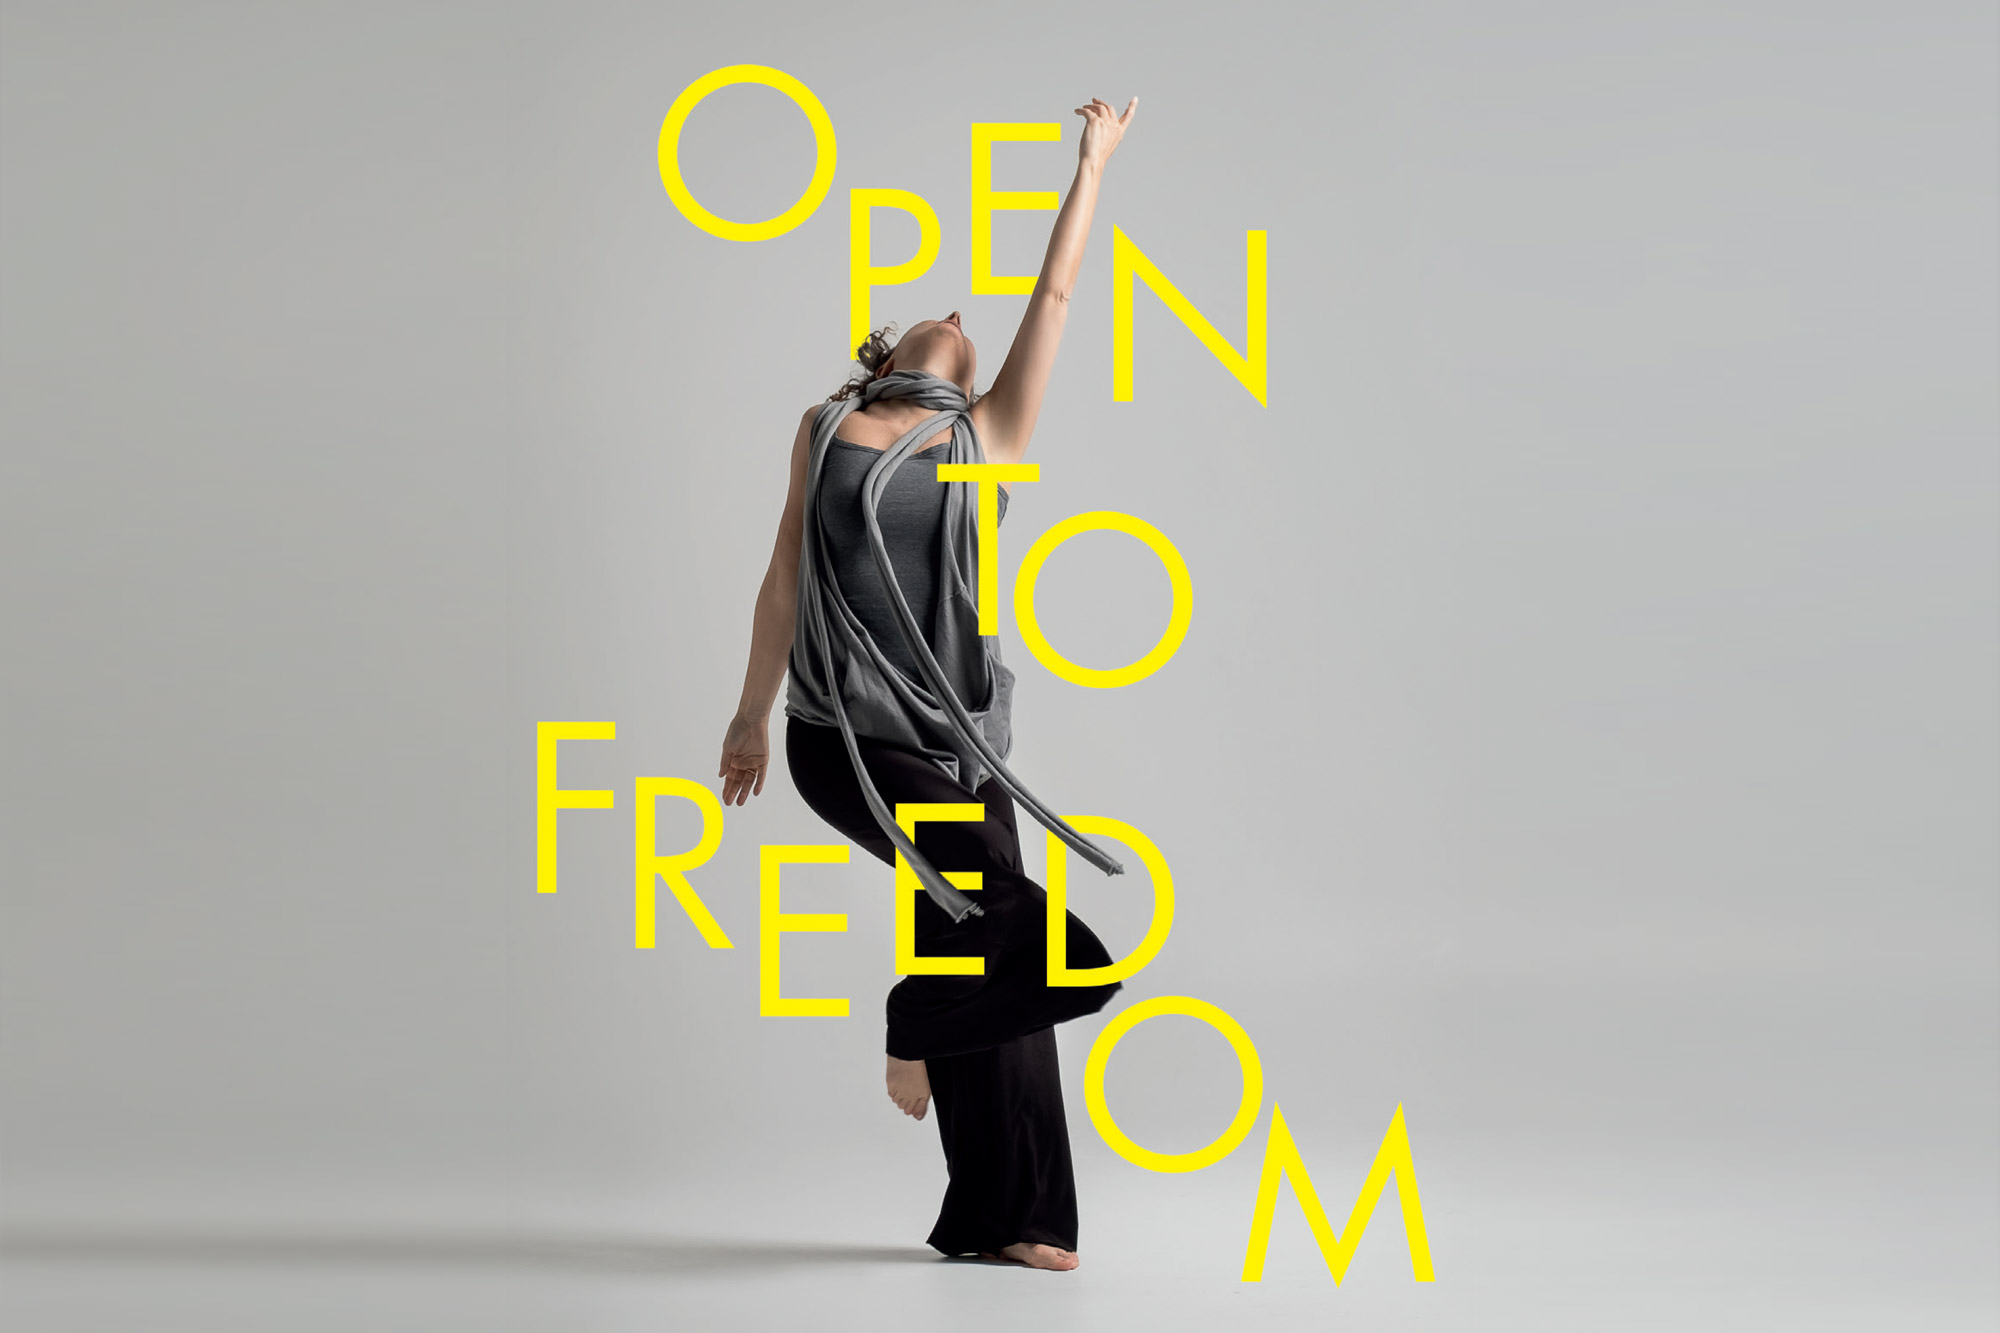 Soul Motion - Open to freedom